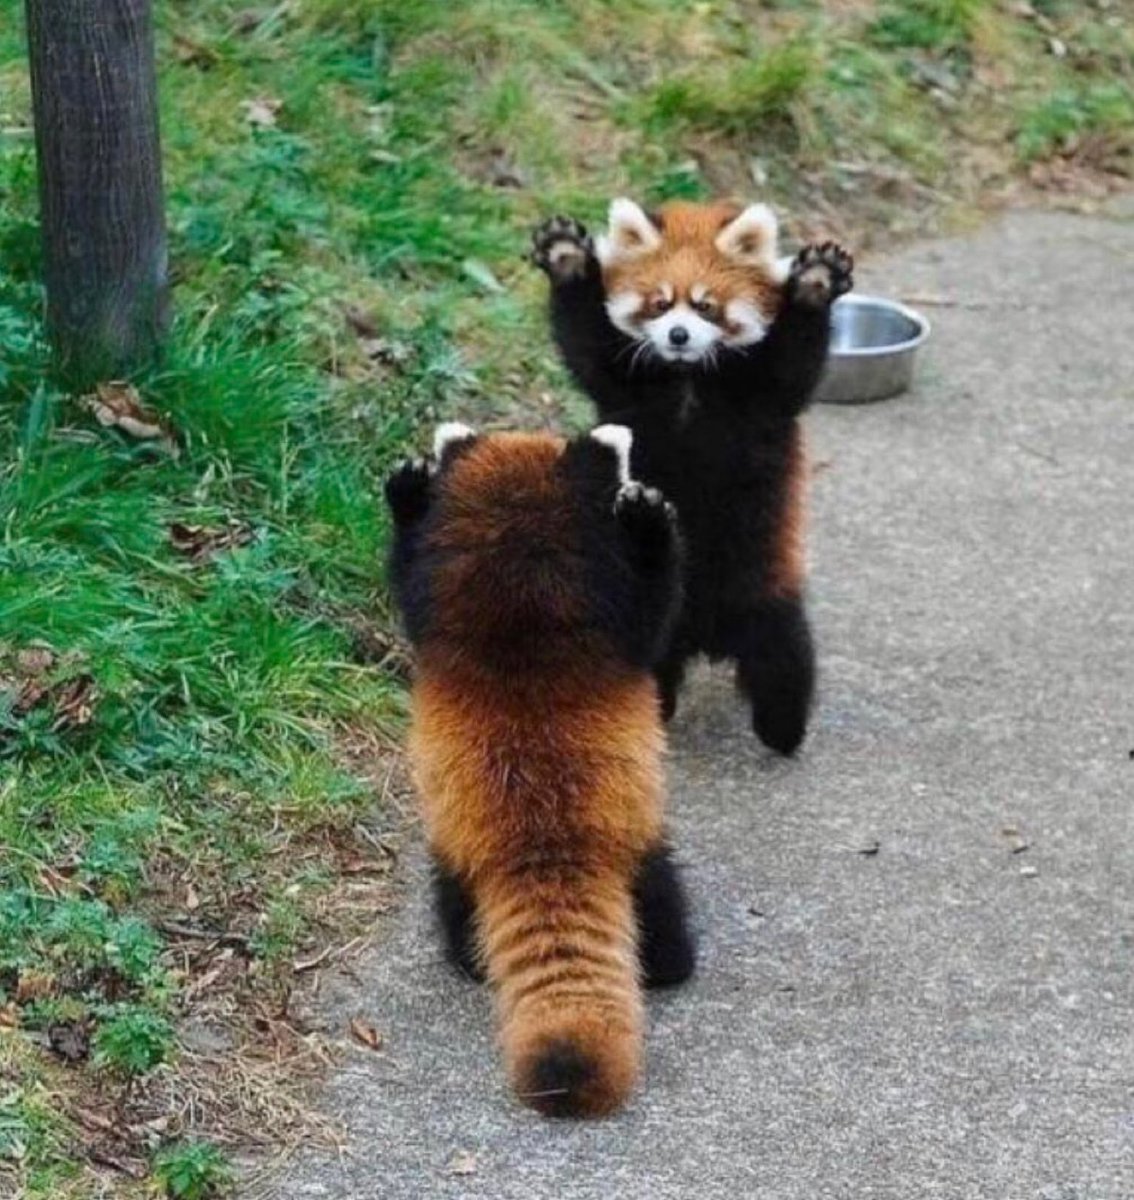 This can be a hard day for people so here are some red pandas making themselves look as big and as brave as they can